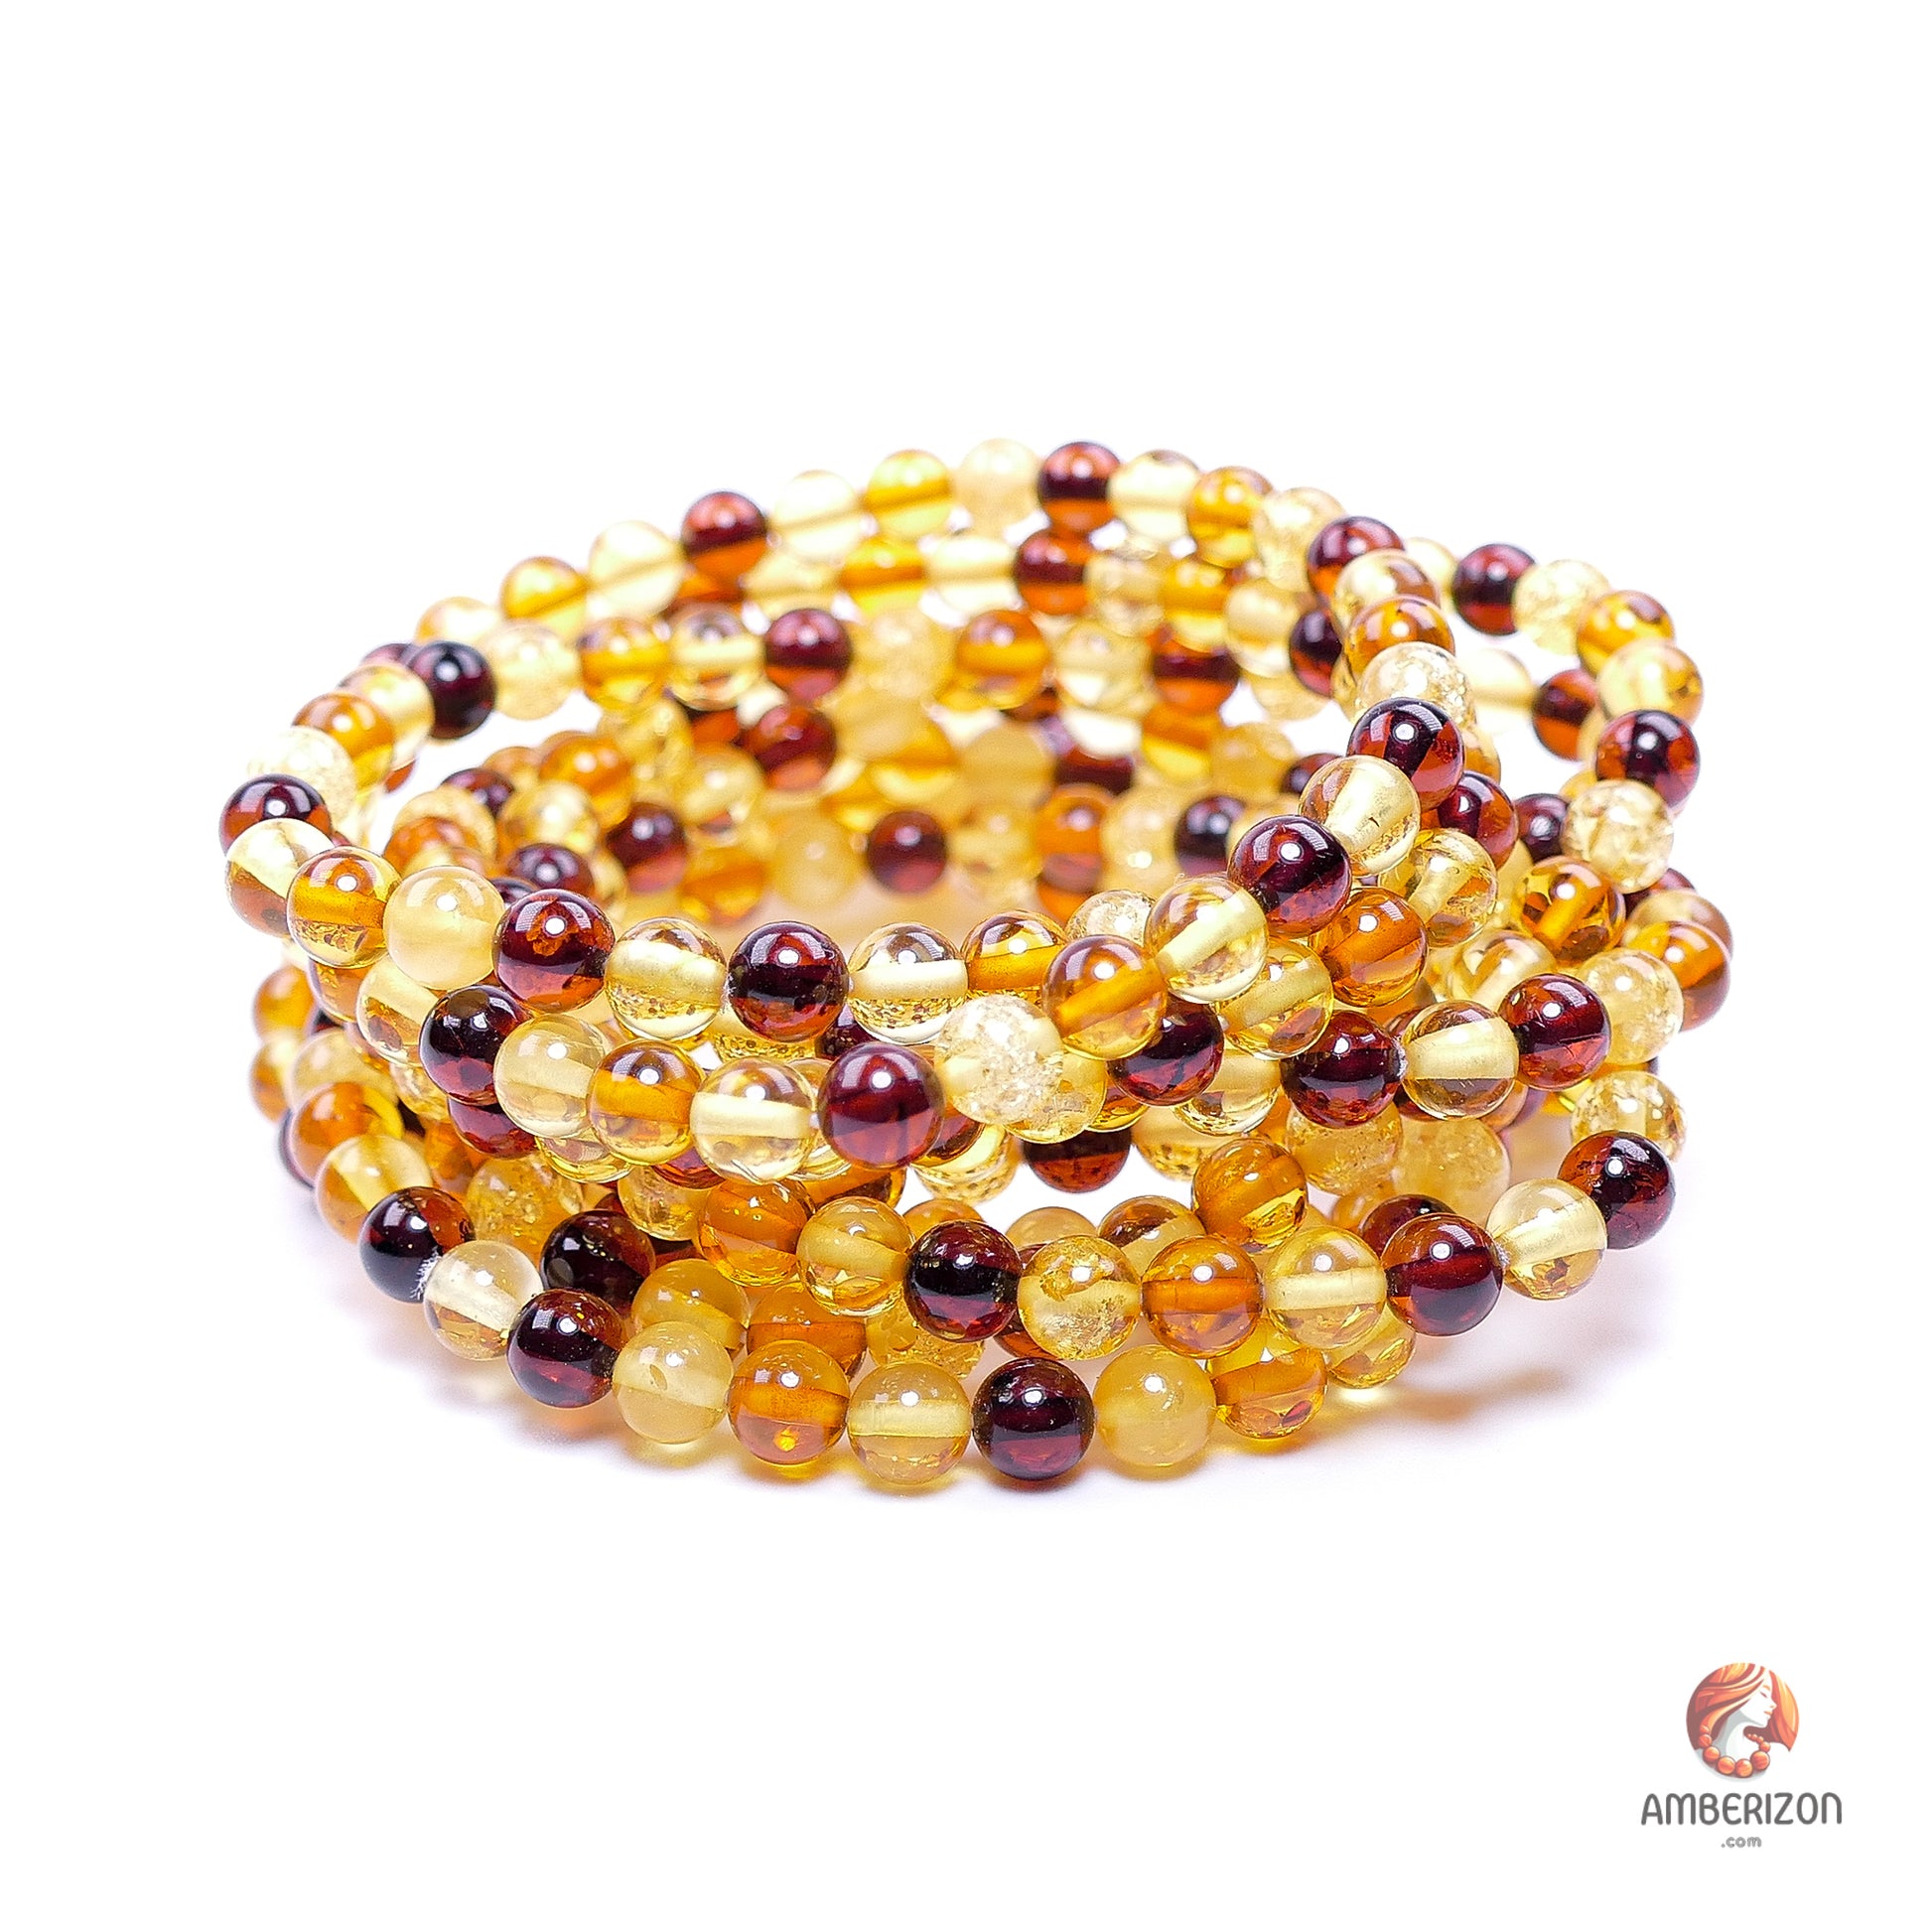 Clear premium AAA amber ball bracelet - Round multicolored beads - Stretchy